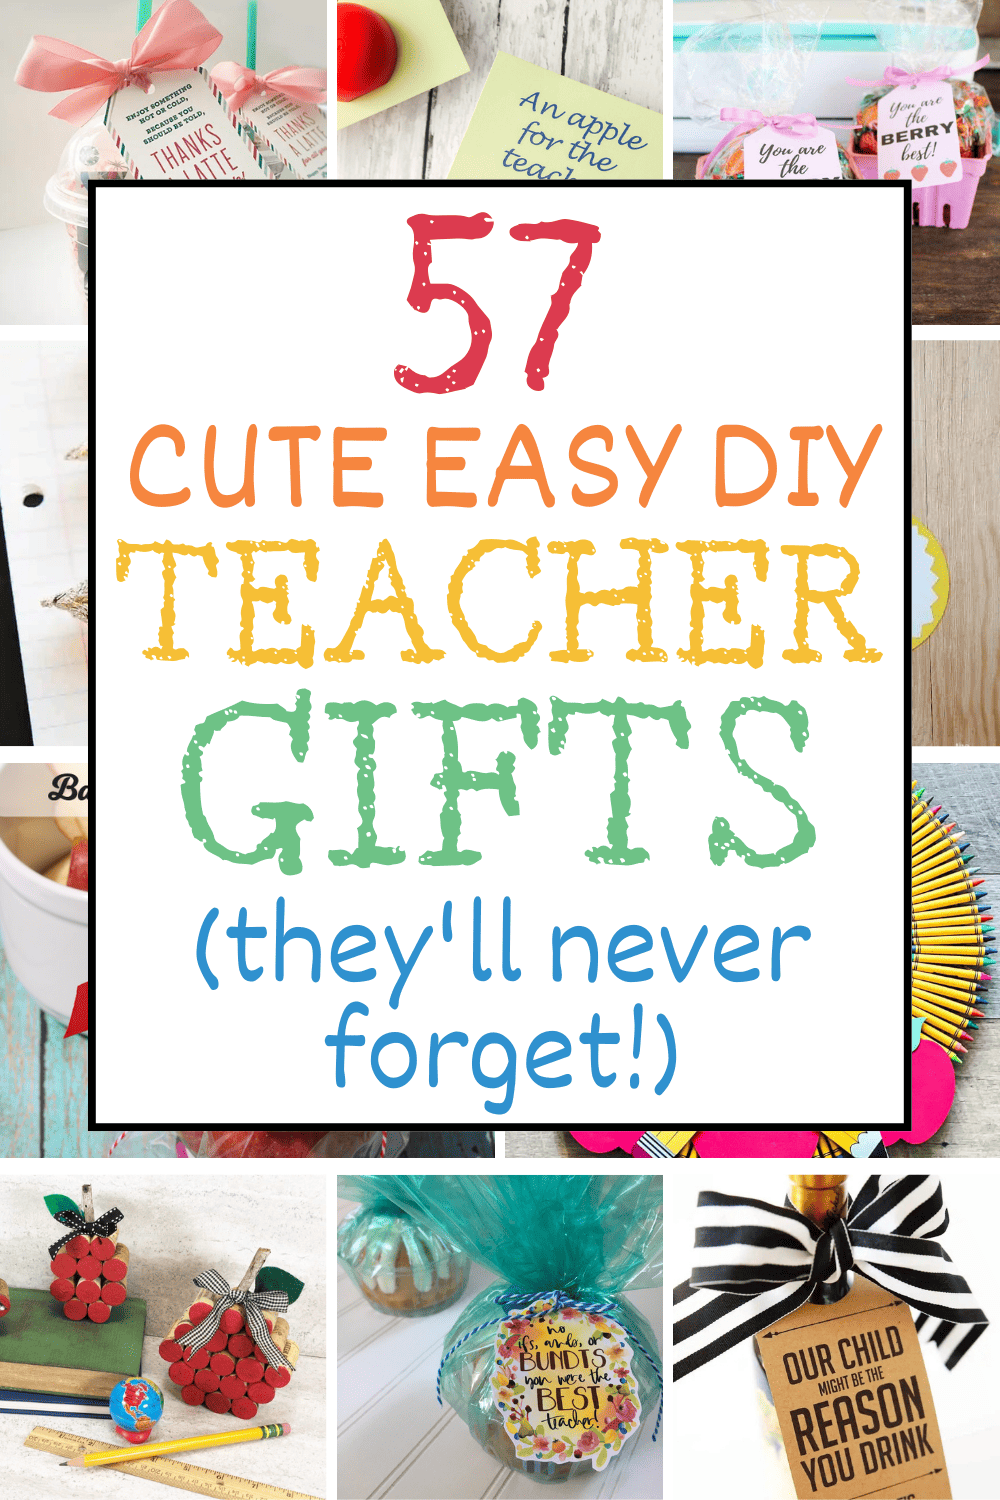 Small teacher gift ideas! The best small teacher gift ideas christmas, small teacher gifts beginning of year, small teacher appreciation gifts ideas, cute small teacher gifts, small gift ideas for teachers, small gift ideas for teacher appreciation, small teacher appreciation gifts free printables, small teacher appreciation gifts diy, easy teacher appreciation gifts diy, cheap diy teacher appreciation gifts, teacher appreciation gifts from students diy, welcome back to school gifts for teacher.